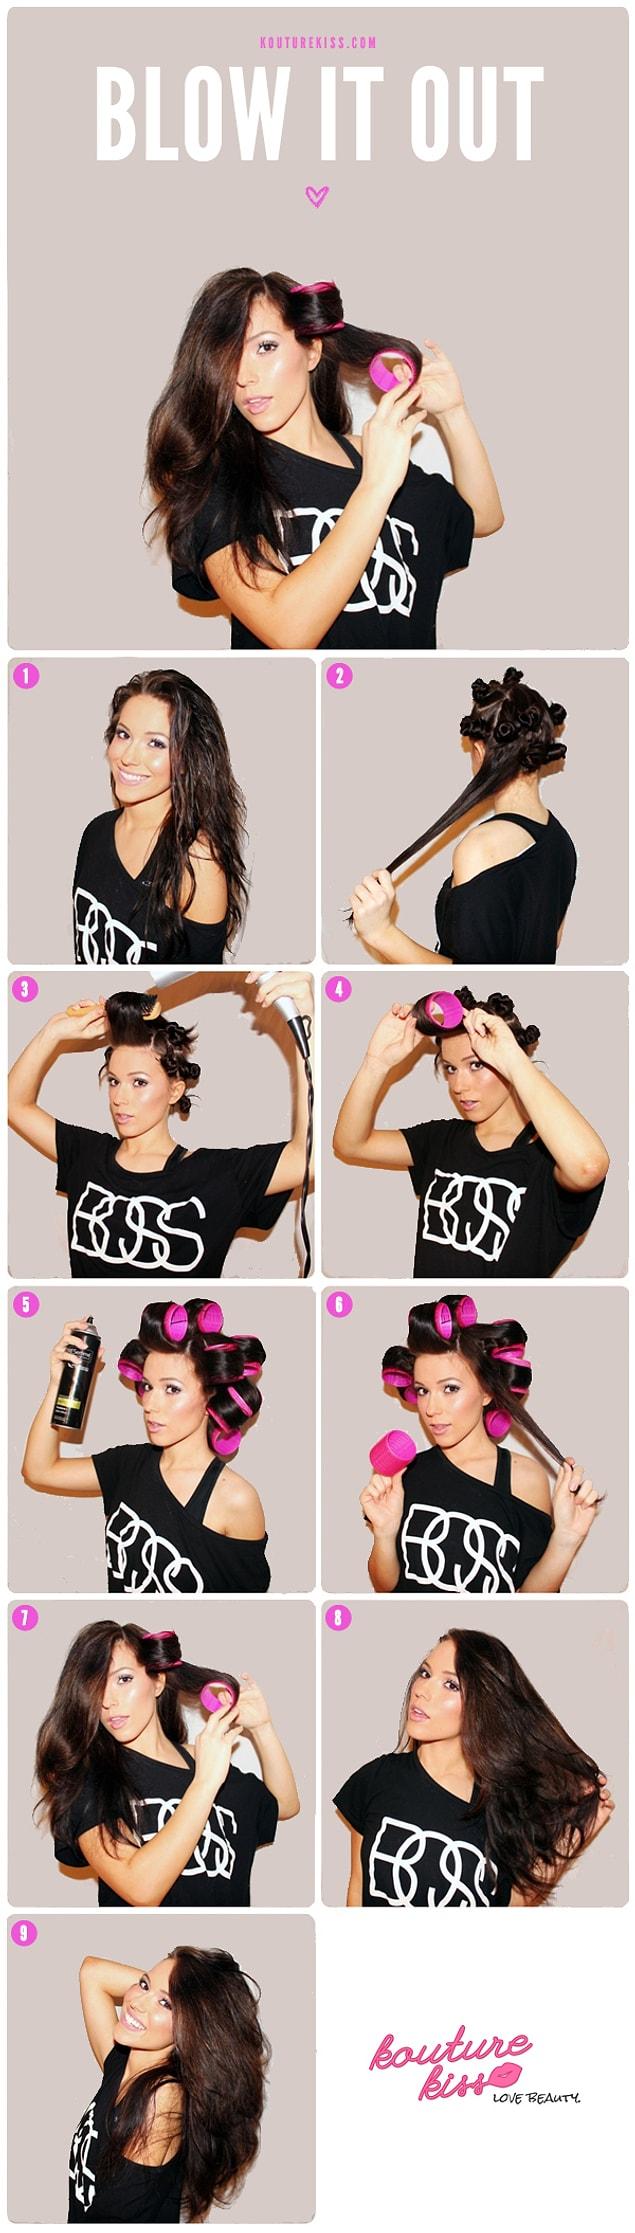 16. You can also style your hair with big hair rollers like shown below.